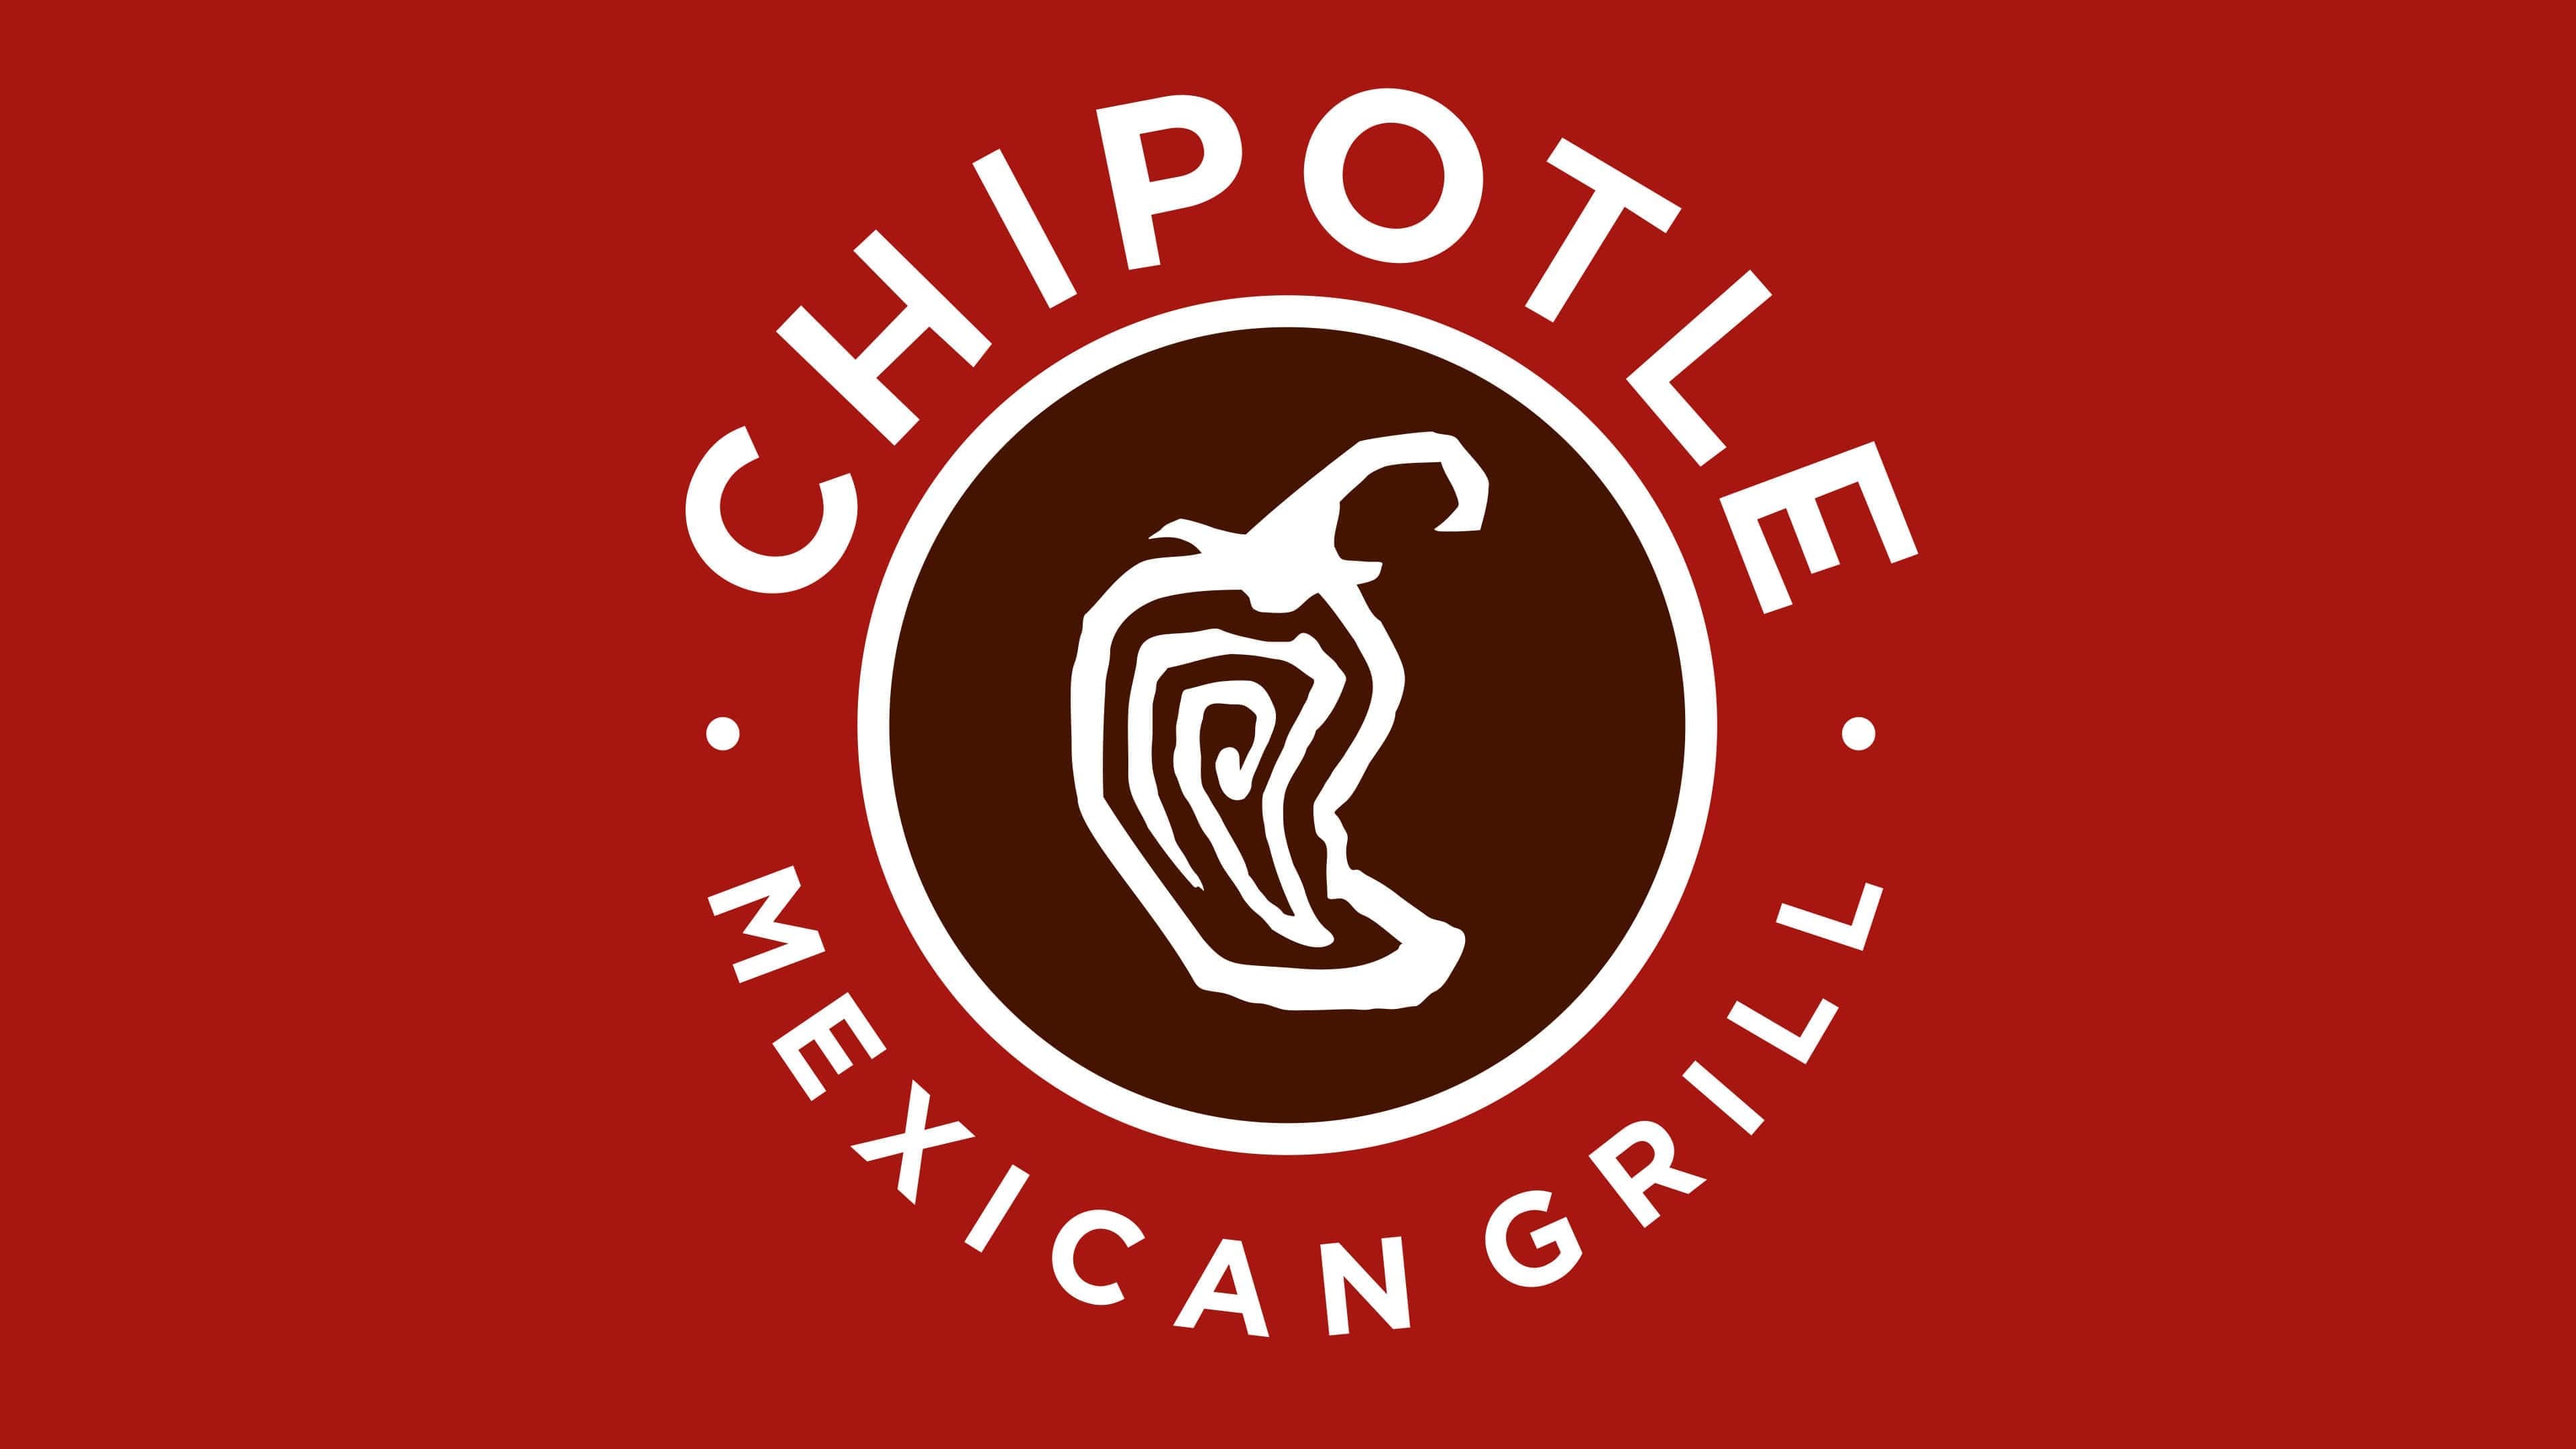 Chipotle: Mexican grill, Iconic brand, Real ingredients, Real purpose, Real flavor. 3840x2160 4K Wallpaper.